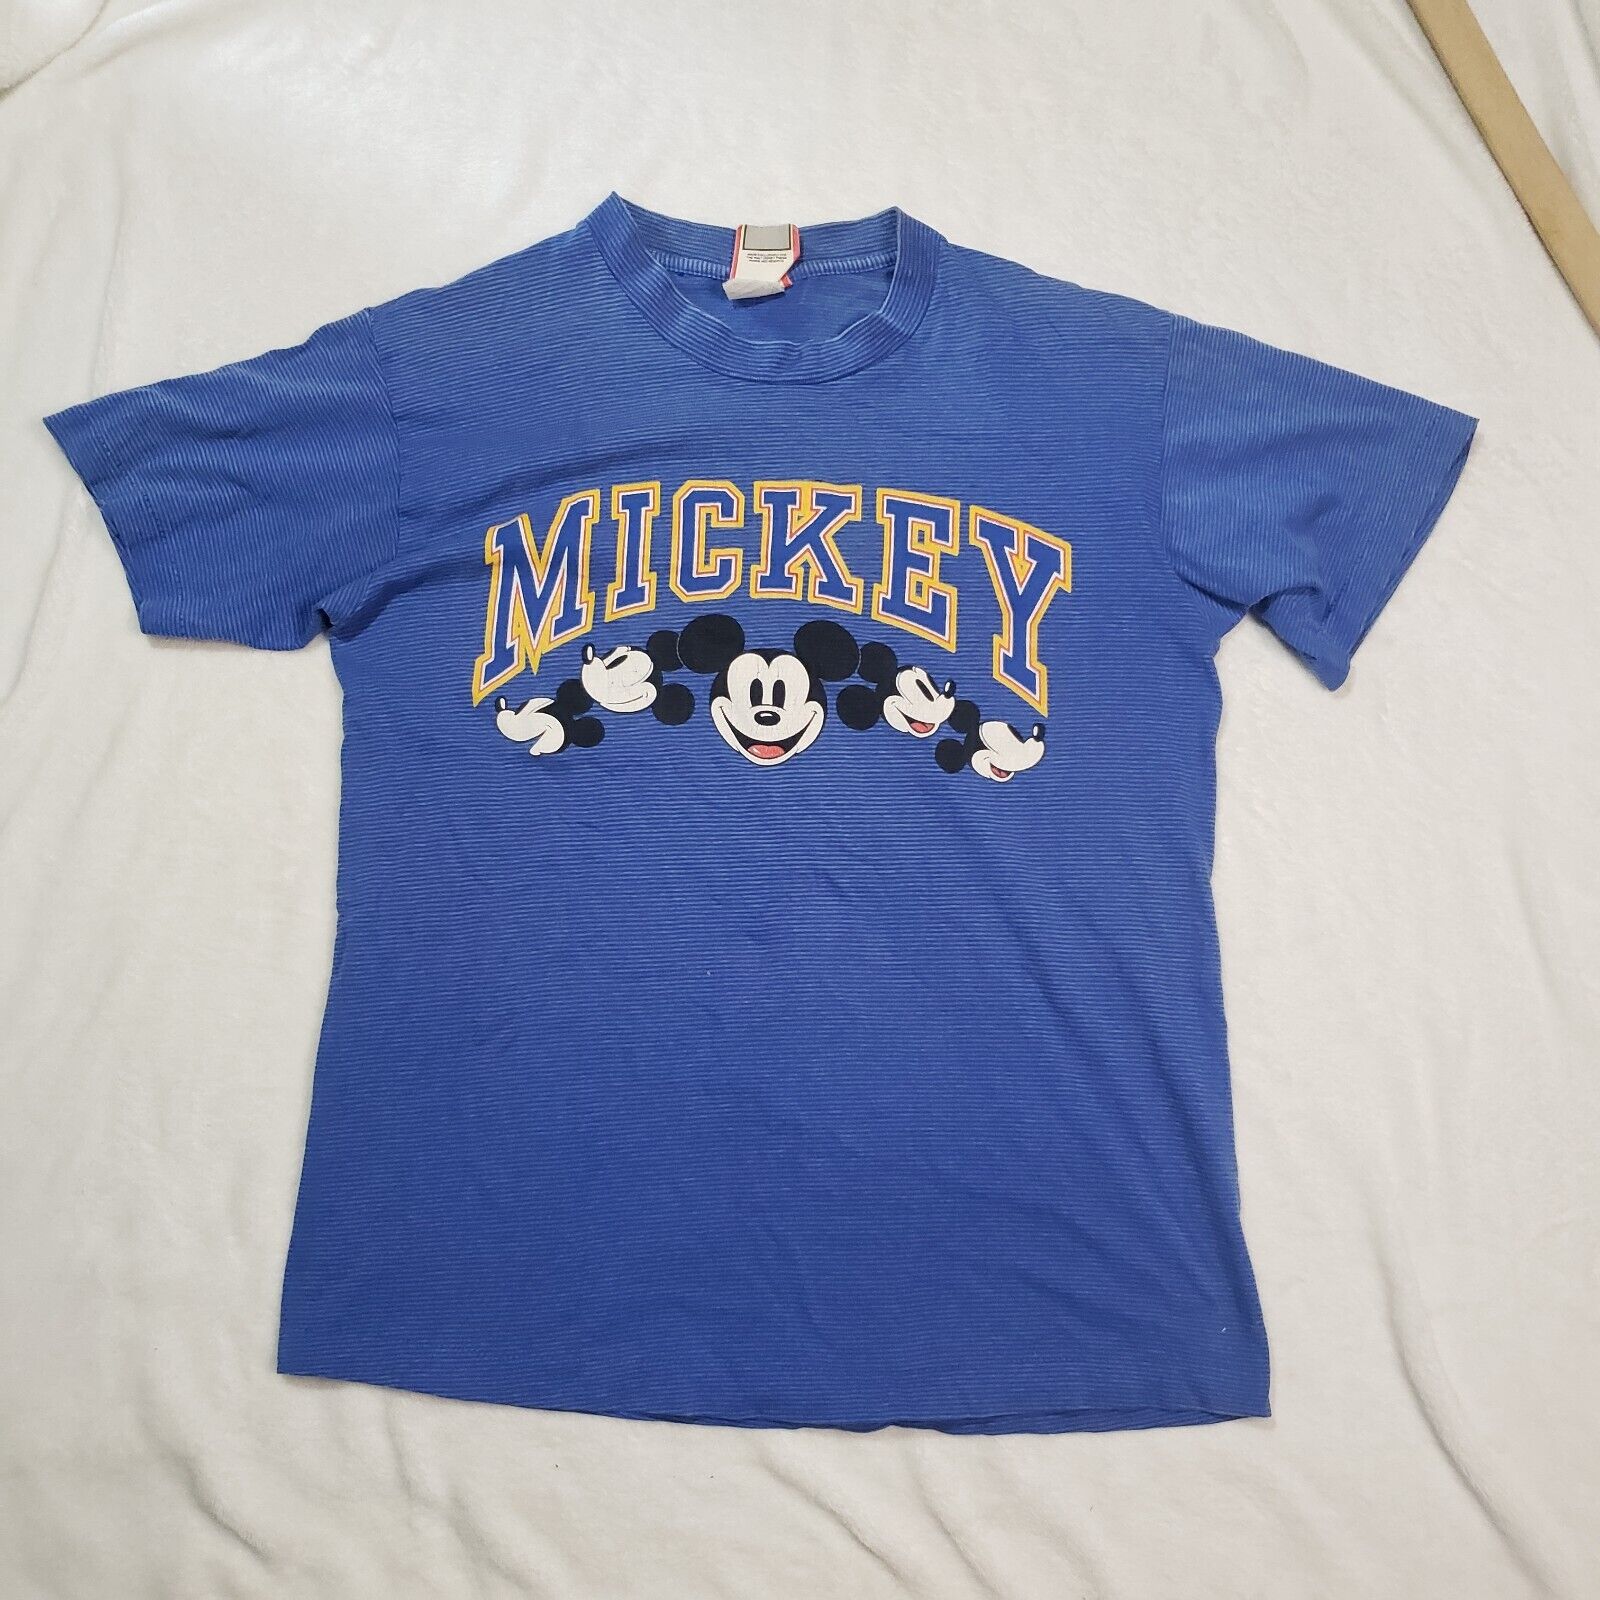 Vintage Disney Mickey Mouse Blue Striped Tee Shirt Size Small/Med USA